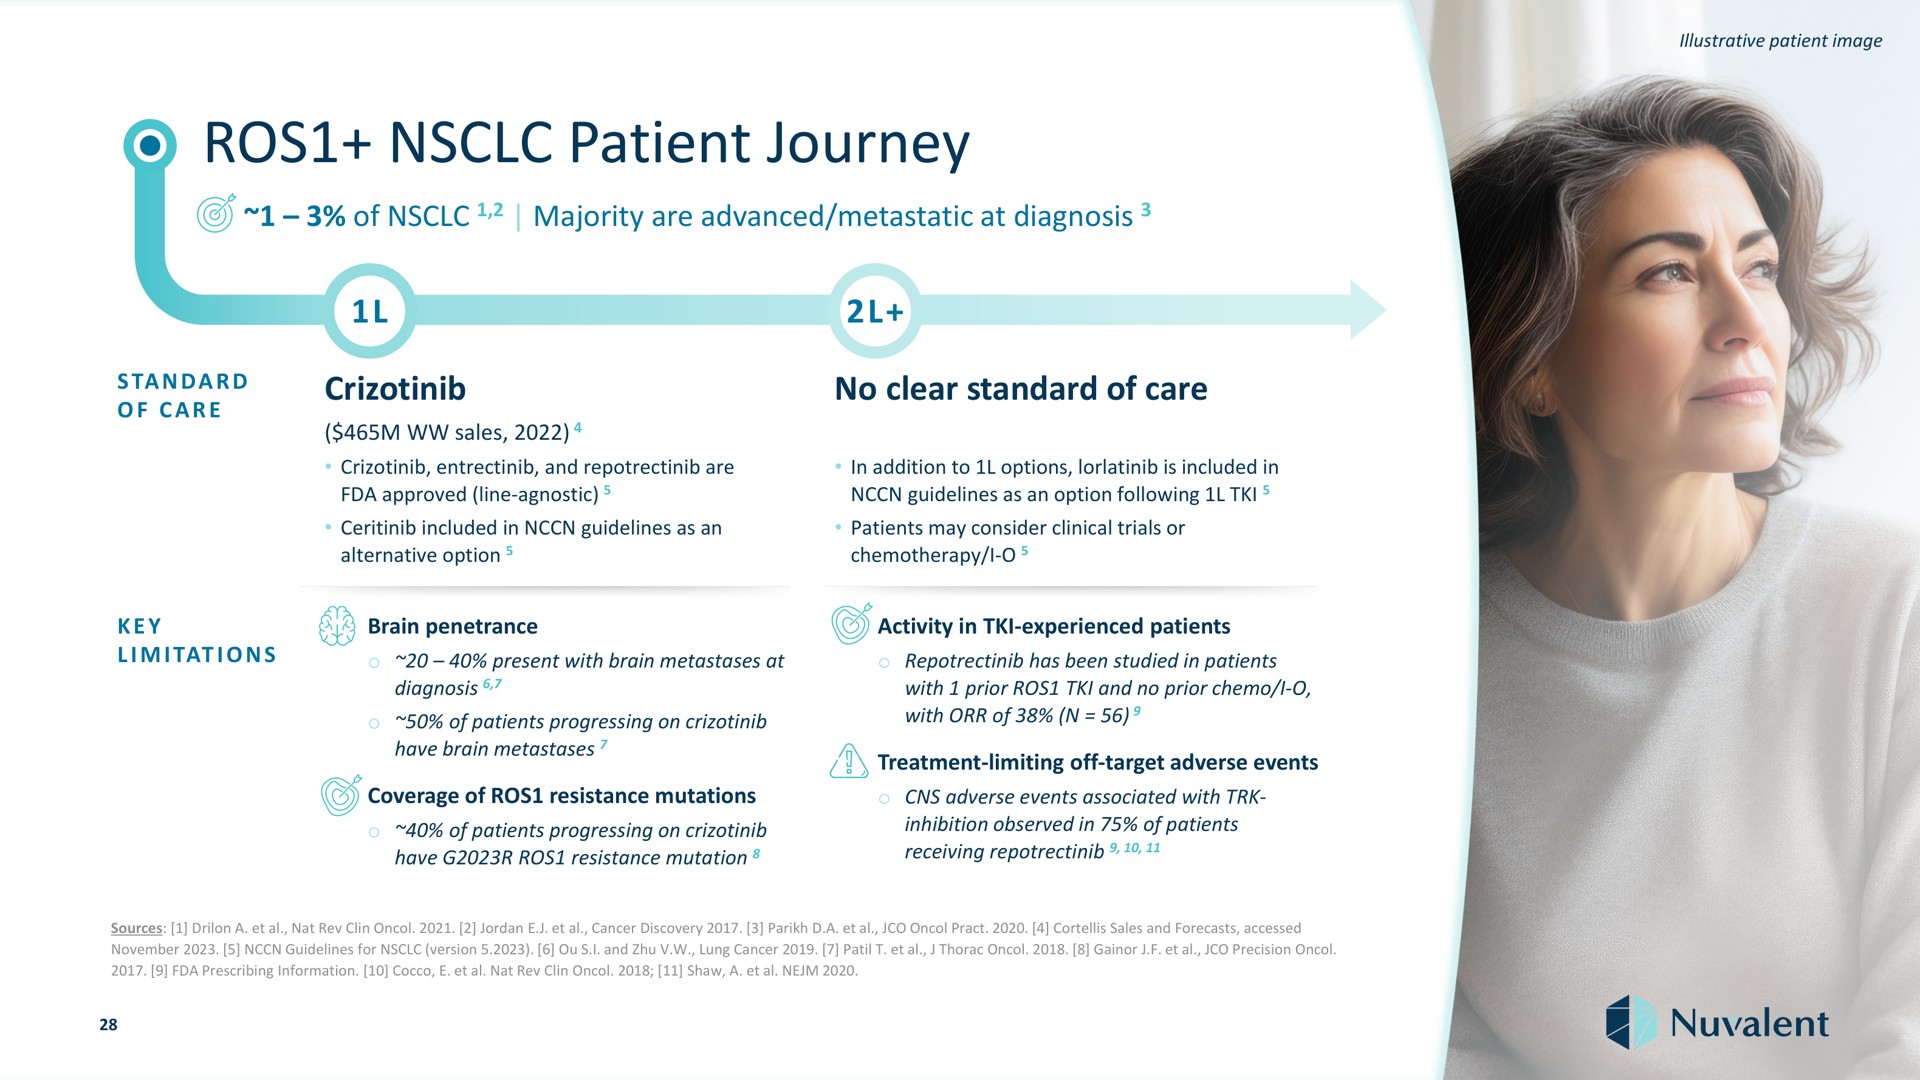 patient journey of majority are advanced metastatic at diagnosis of care sales no clear standard of care and are approved line agnostic in addition to options is included in guidelines as an option following included in guidelines as an alternative option patients may consider clinical trials or chemotherapy i key brain penetrance activity in experienced patients limitations present with brain metastases at diagnosis has been studied in patients with prior and no prior i of patients progressing on have brain metastases with of treatment limiting off target adverse events coverage of resistance mutations of patients progressing on have resistance mutation adverse events associated with inhibition observed in of patients receiving sources a nat rev jordan cancer discovery a sales and forecasts accessed guidelines for version i and lung cancer precision prescribing information cocco nat rev shaw a illustrative image | Nuvalent